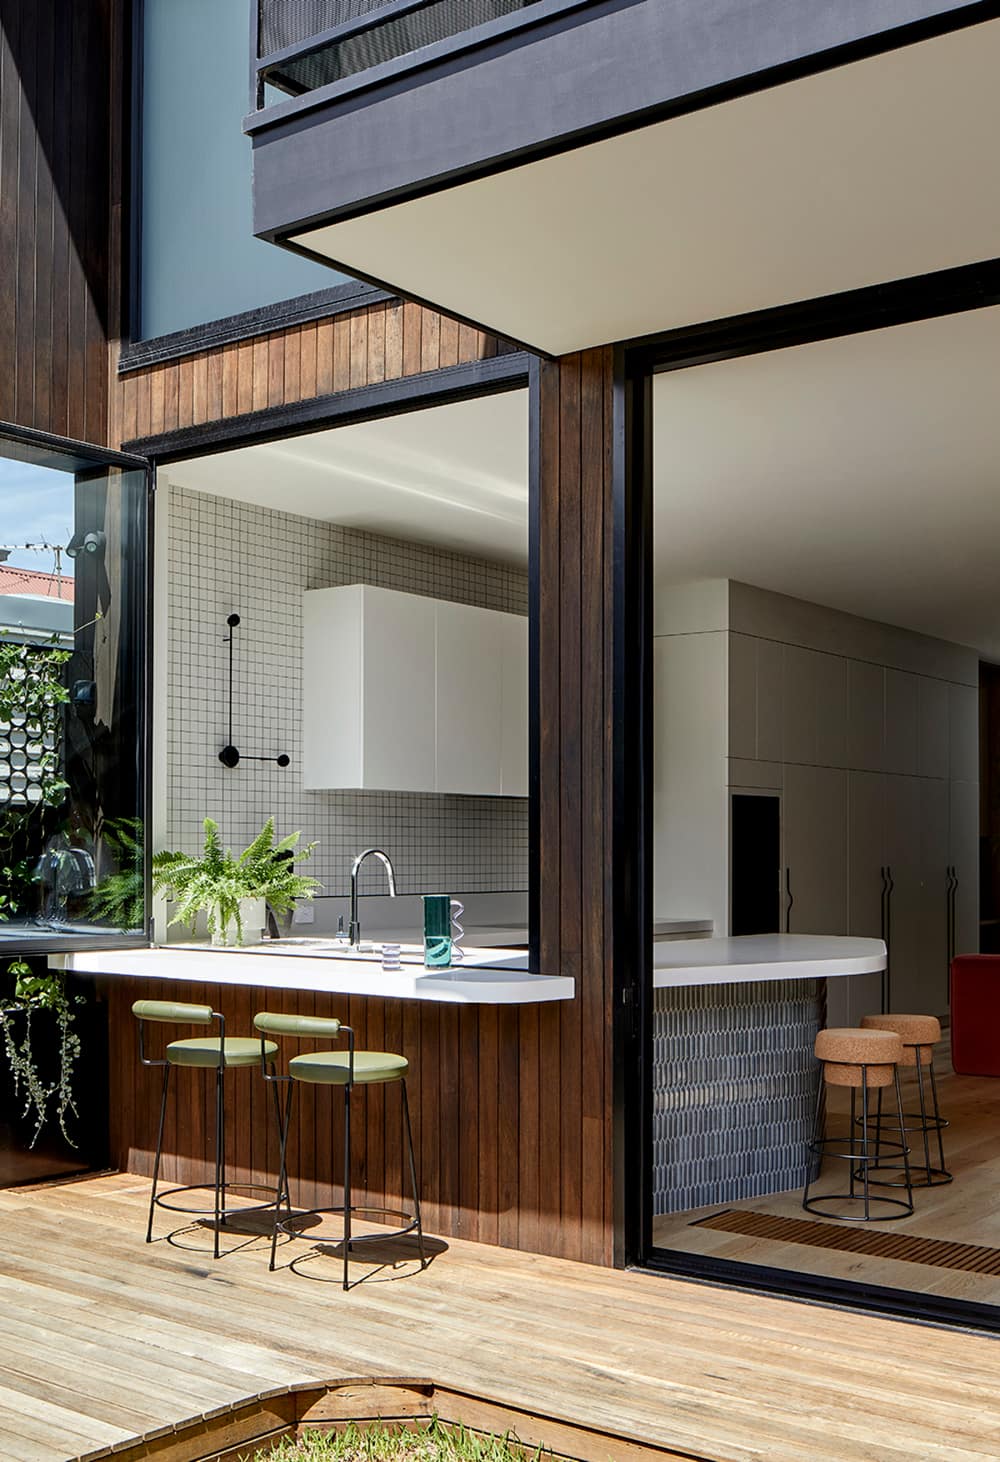 Neville St Residence by Chan Architecture